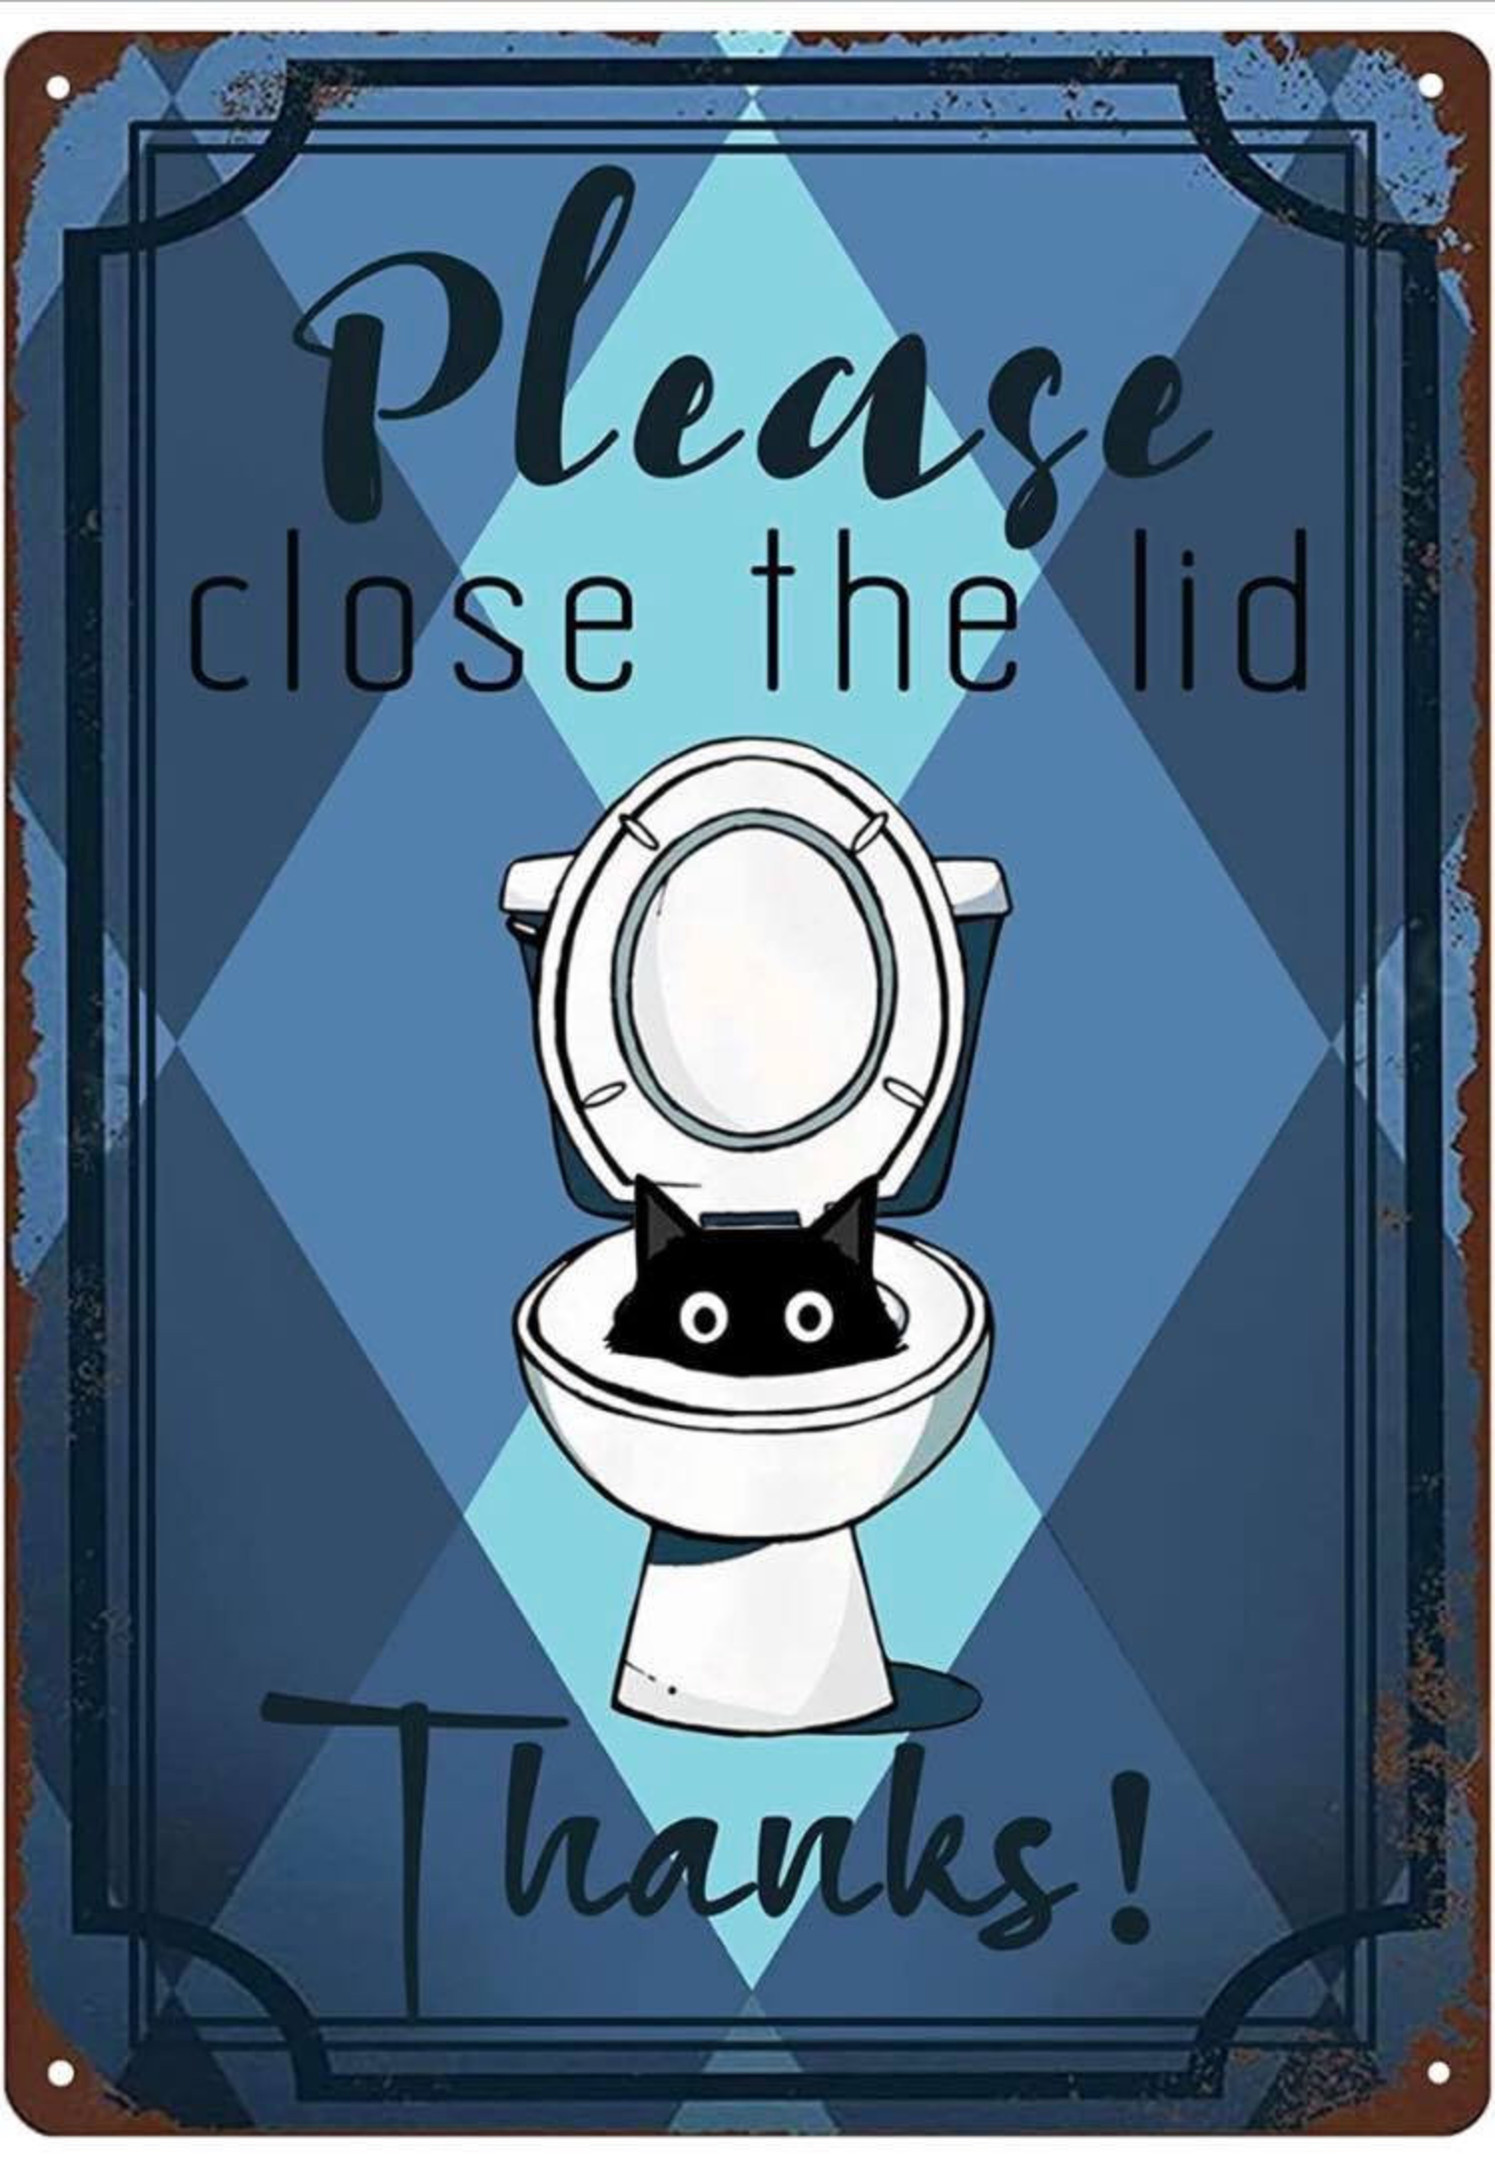 Retro Tin Sign | Please Close The Lid Thanks! Metal Poster | Black Cat Vintage Toilet Restroom Art Wall Metal Sign  inches